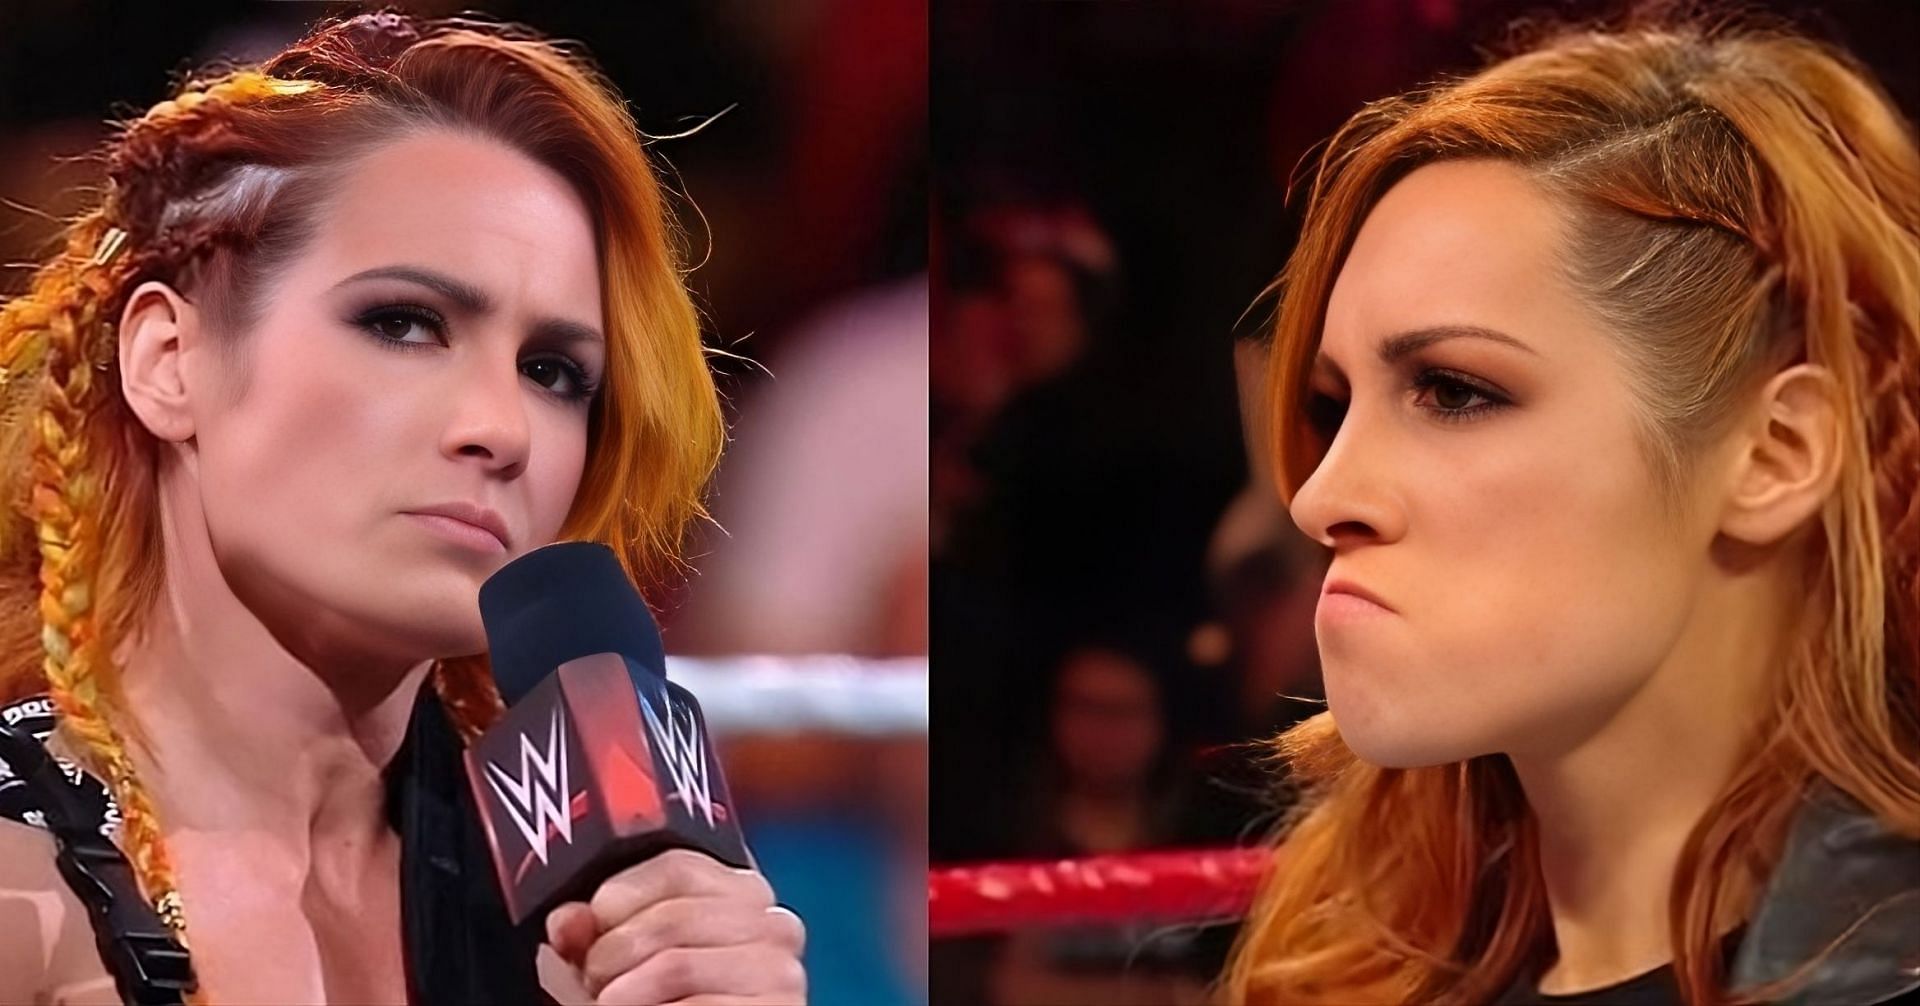 Becky Lynch is the current WWE NXT Women